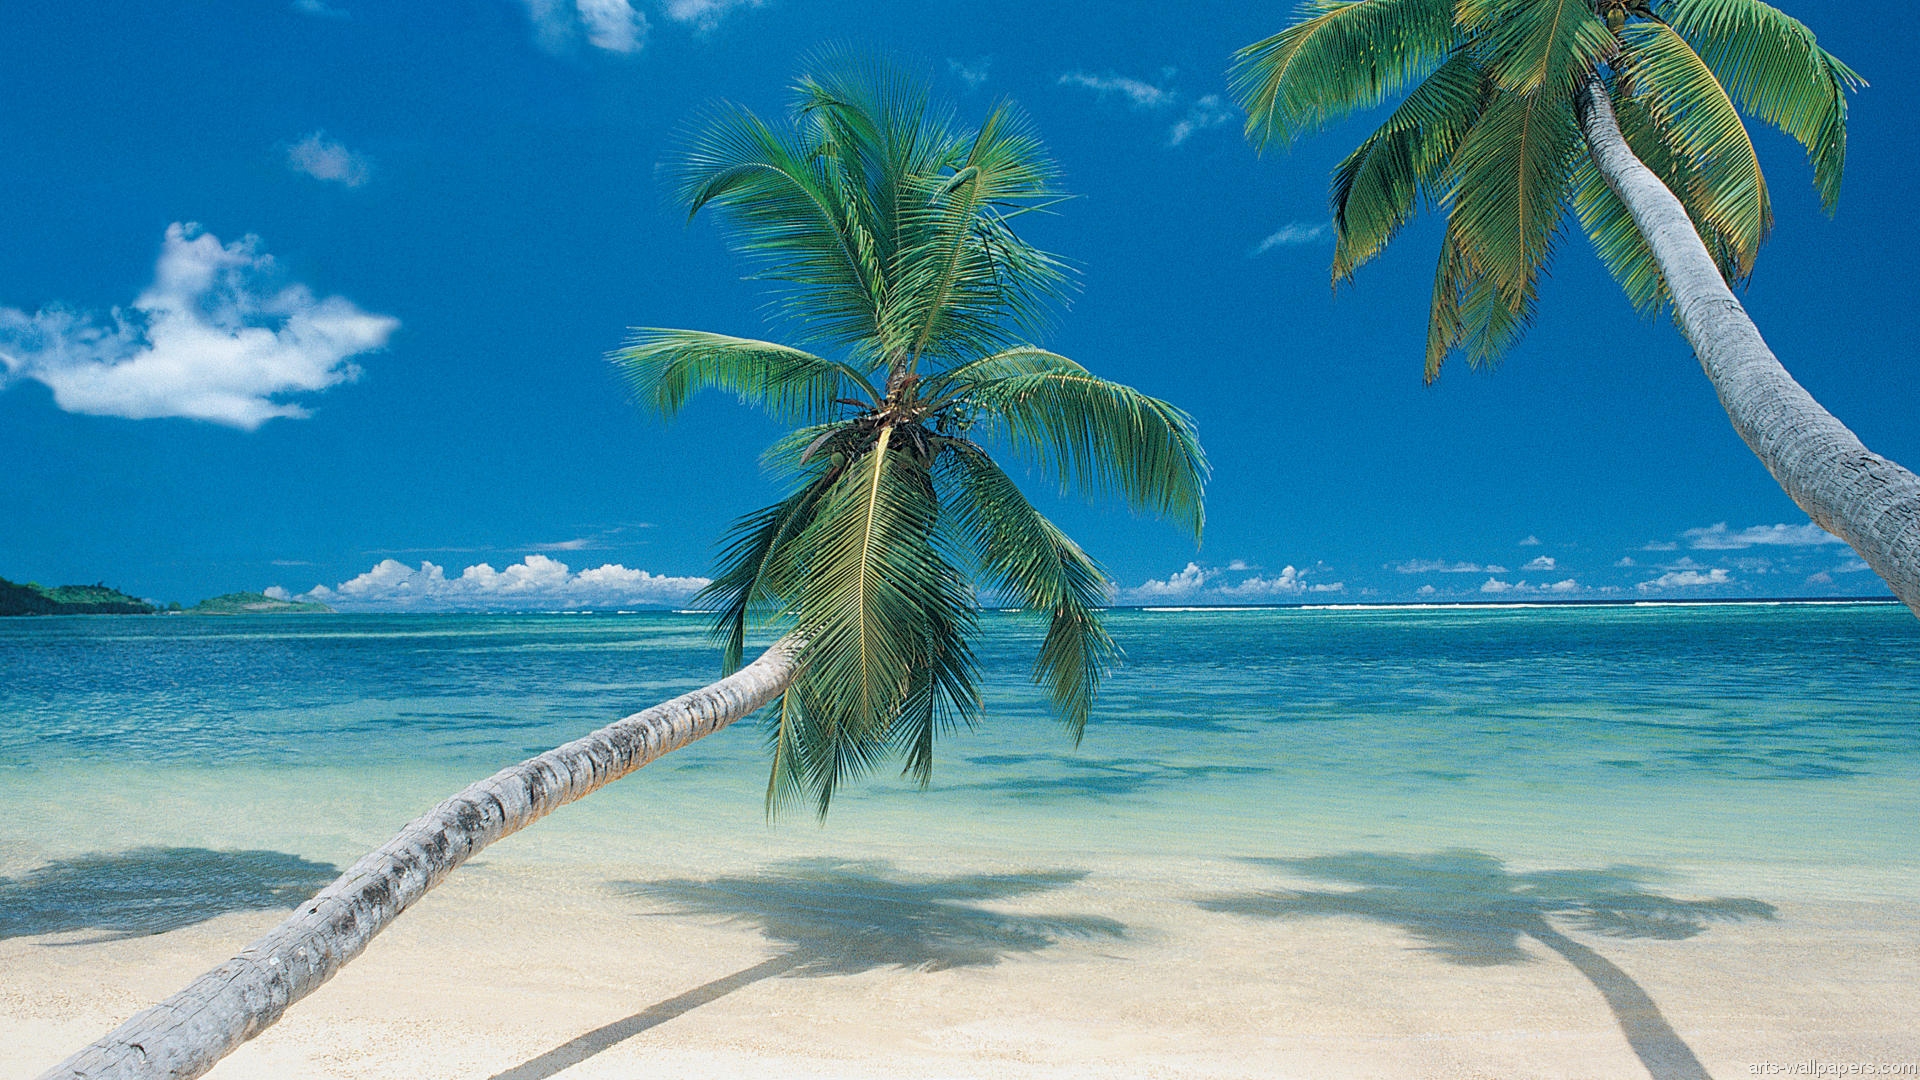  of pictures of tropical paradise beaches High Resolution Wallpaper